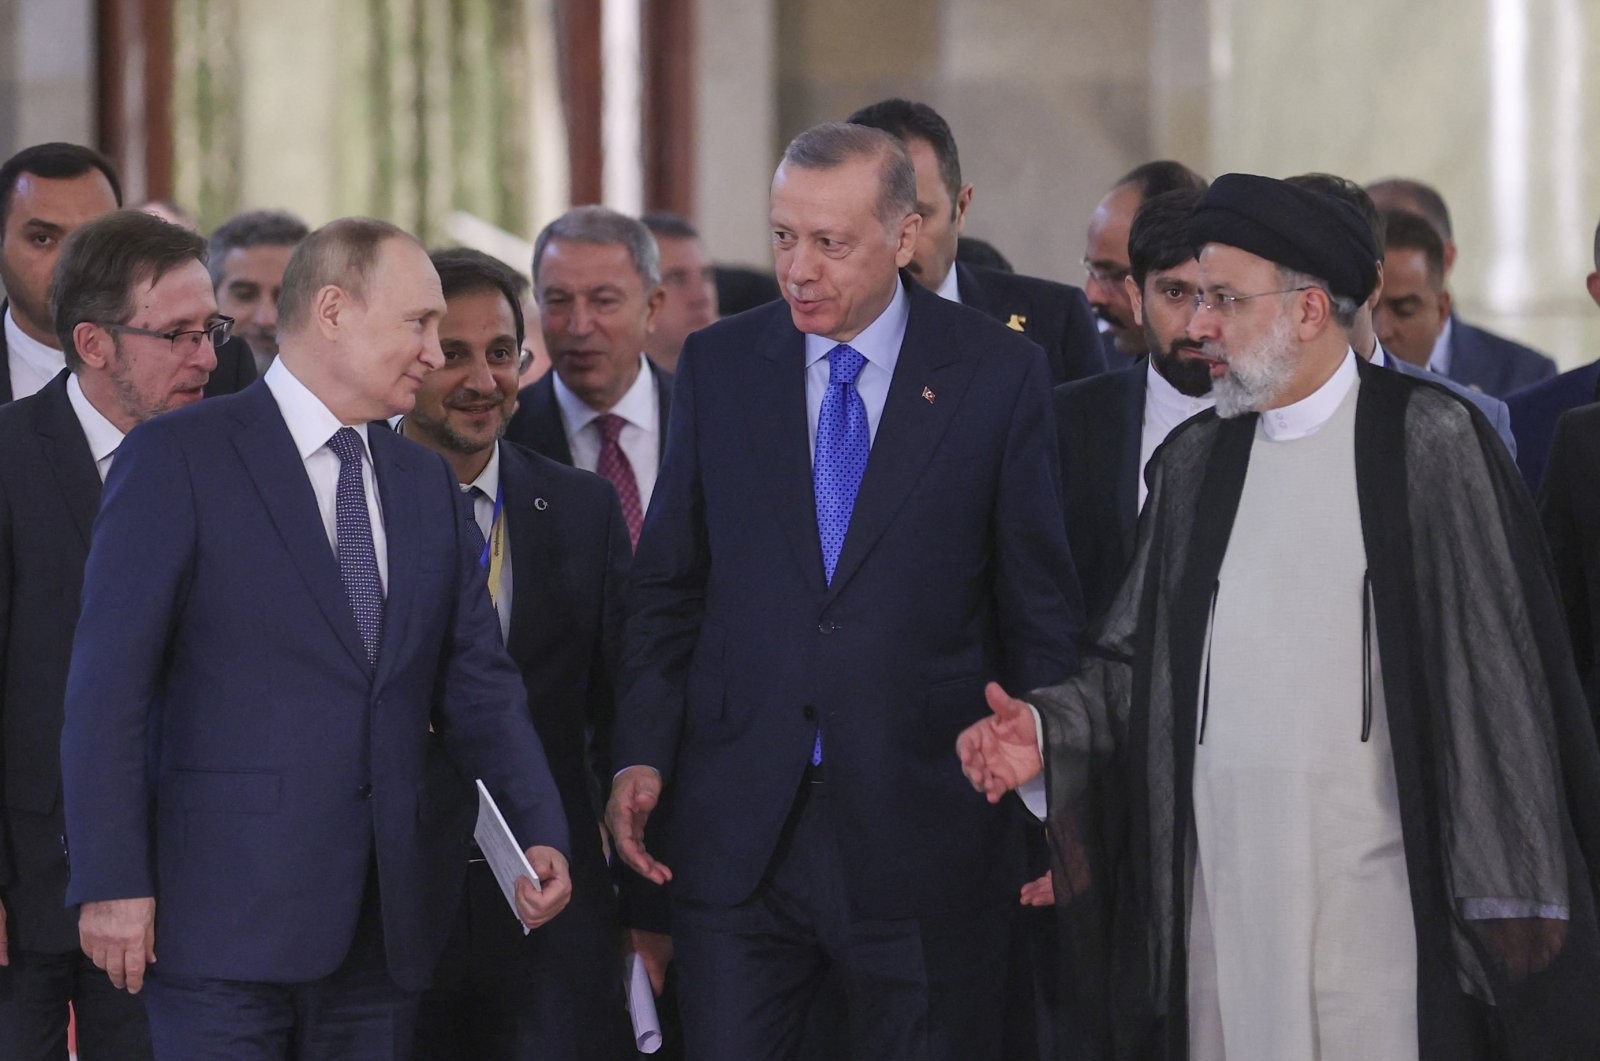 President Recep Tayyip Erdoğan (C), Iranian President Ebrahim Raisi (R) and Russian President Vladimir Putin (L) arrive for a joint news conference after the Astana Trilateral Summit, Tehran, Iran, July 19, 2022. (AFP Photo)